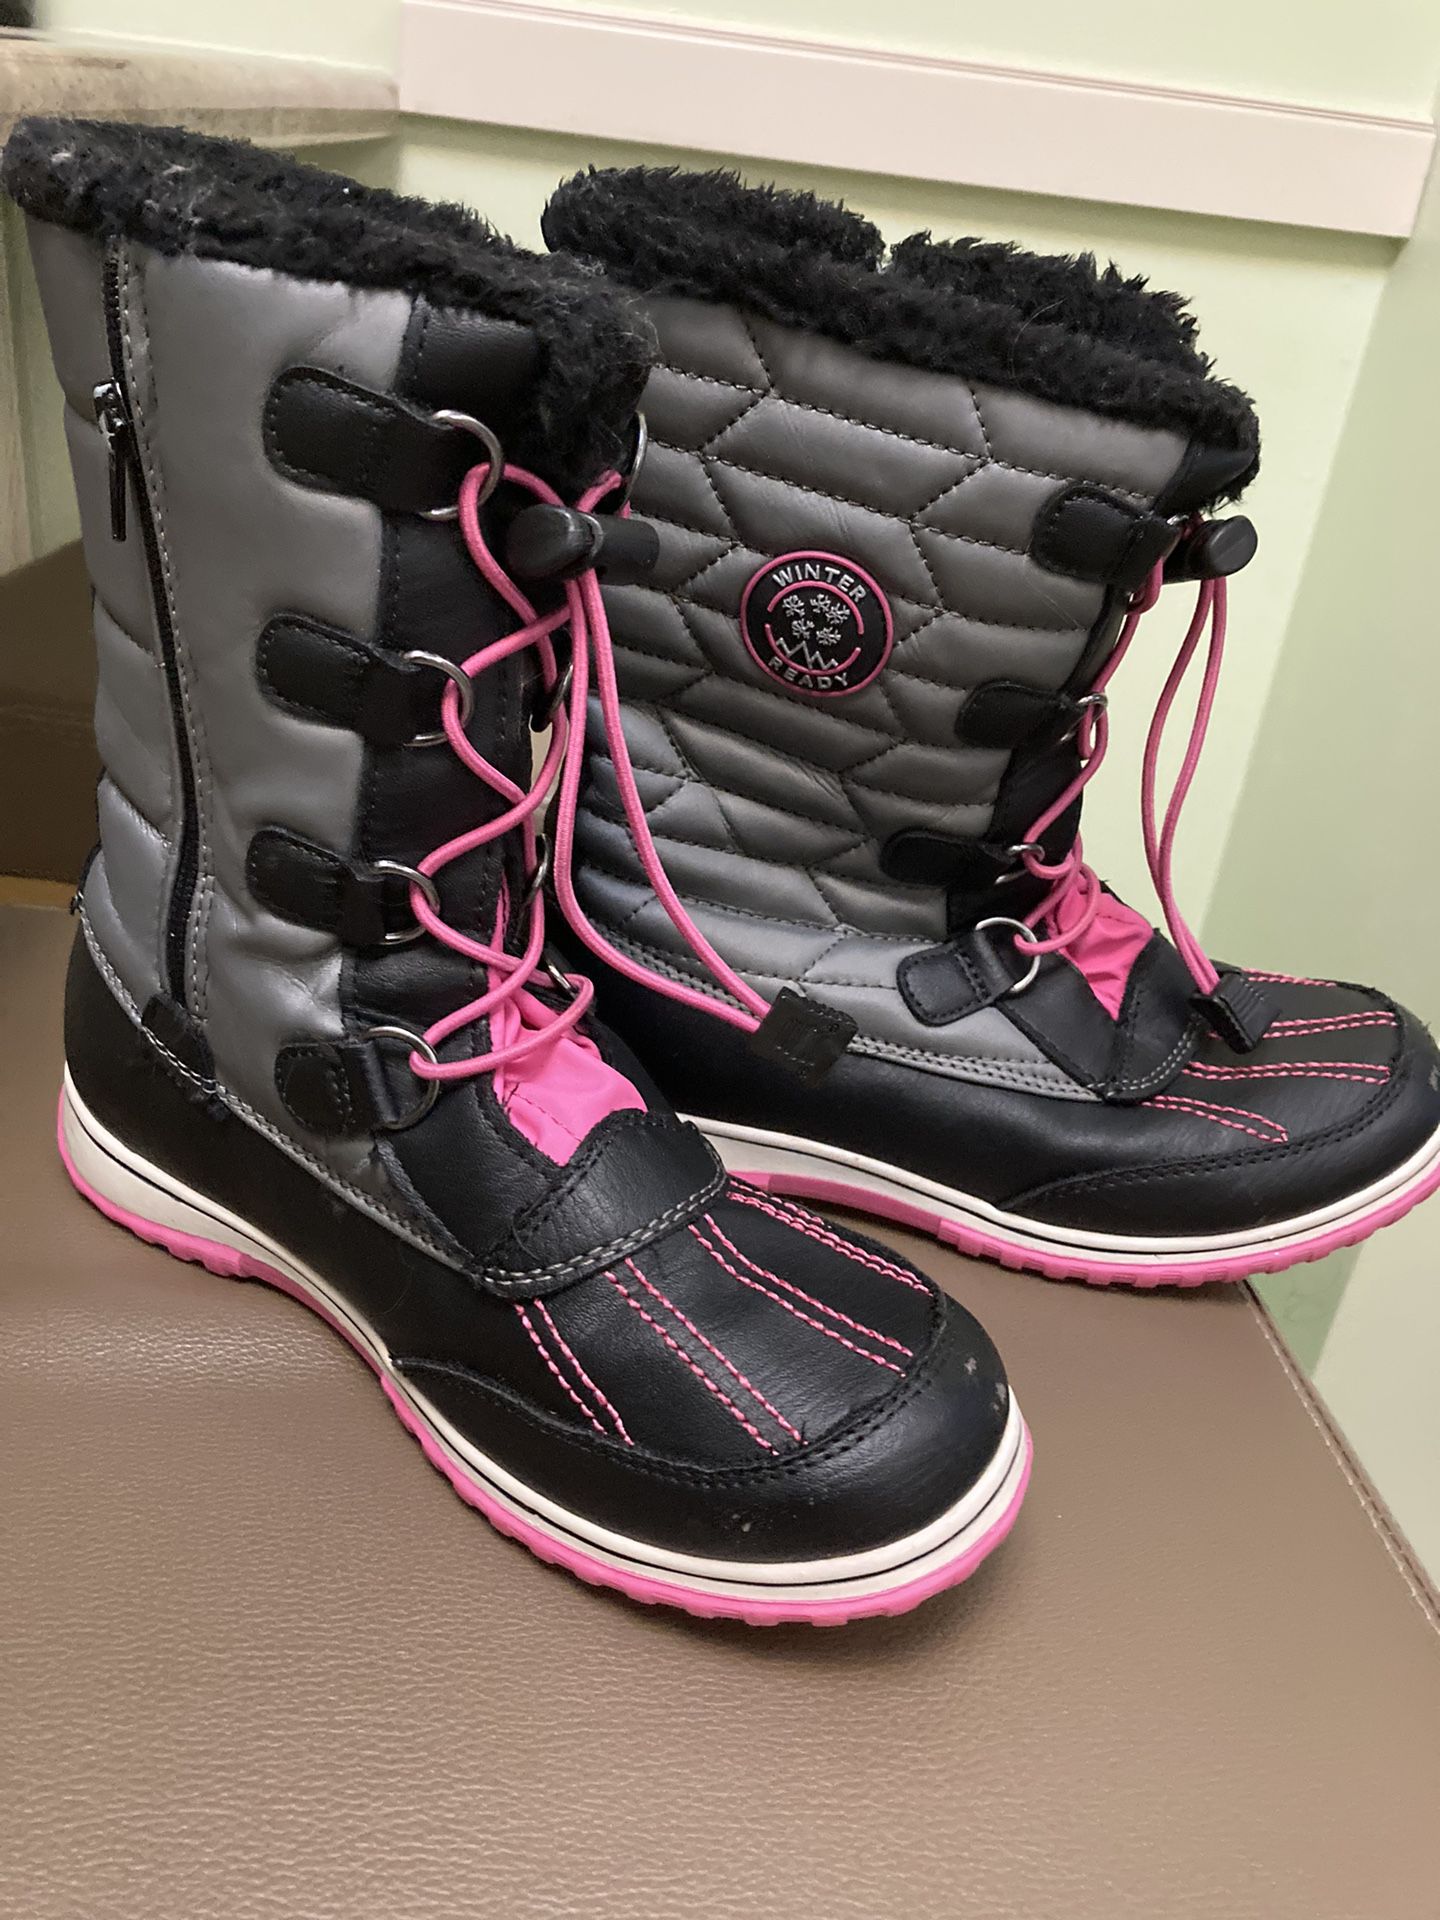 Girls Winter Snow Boots Size 5